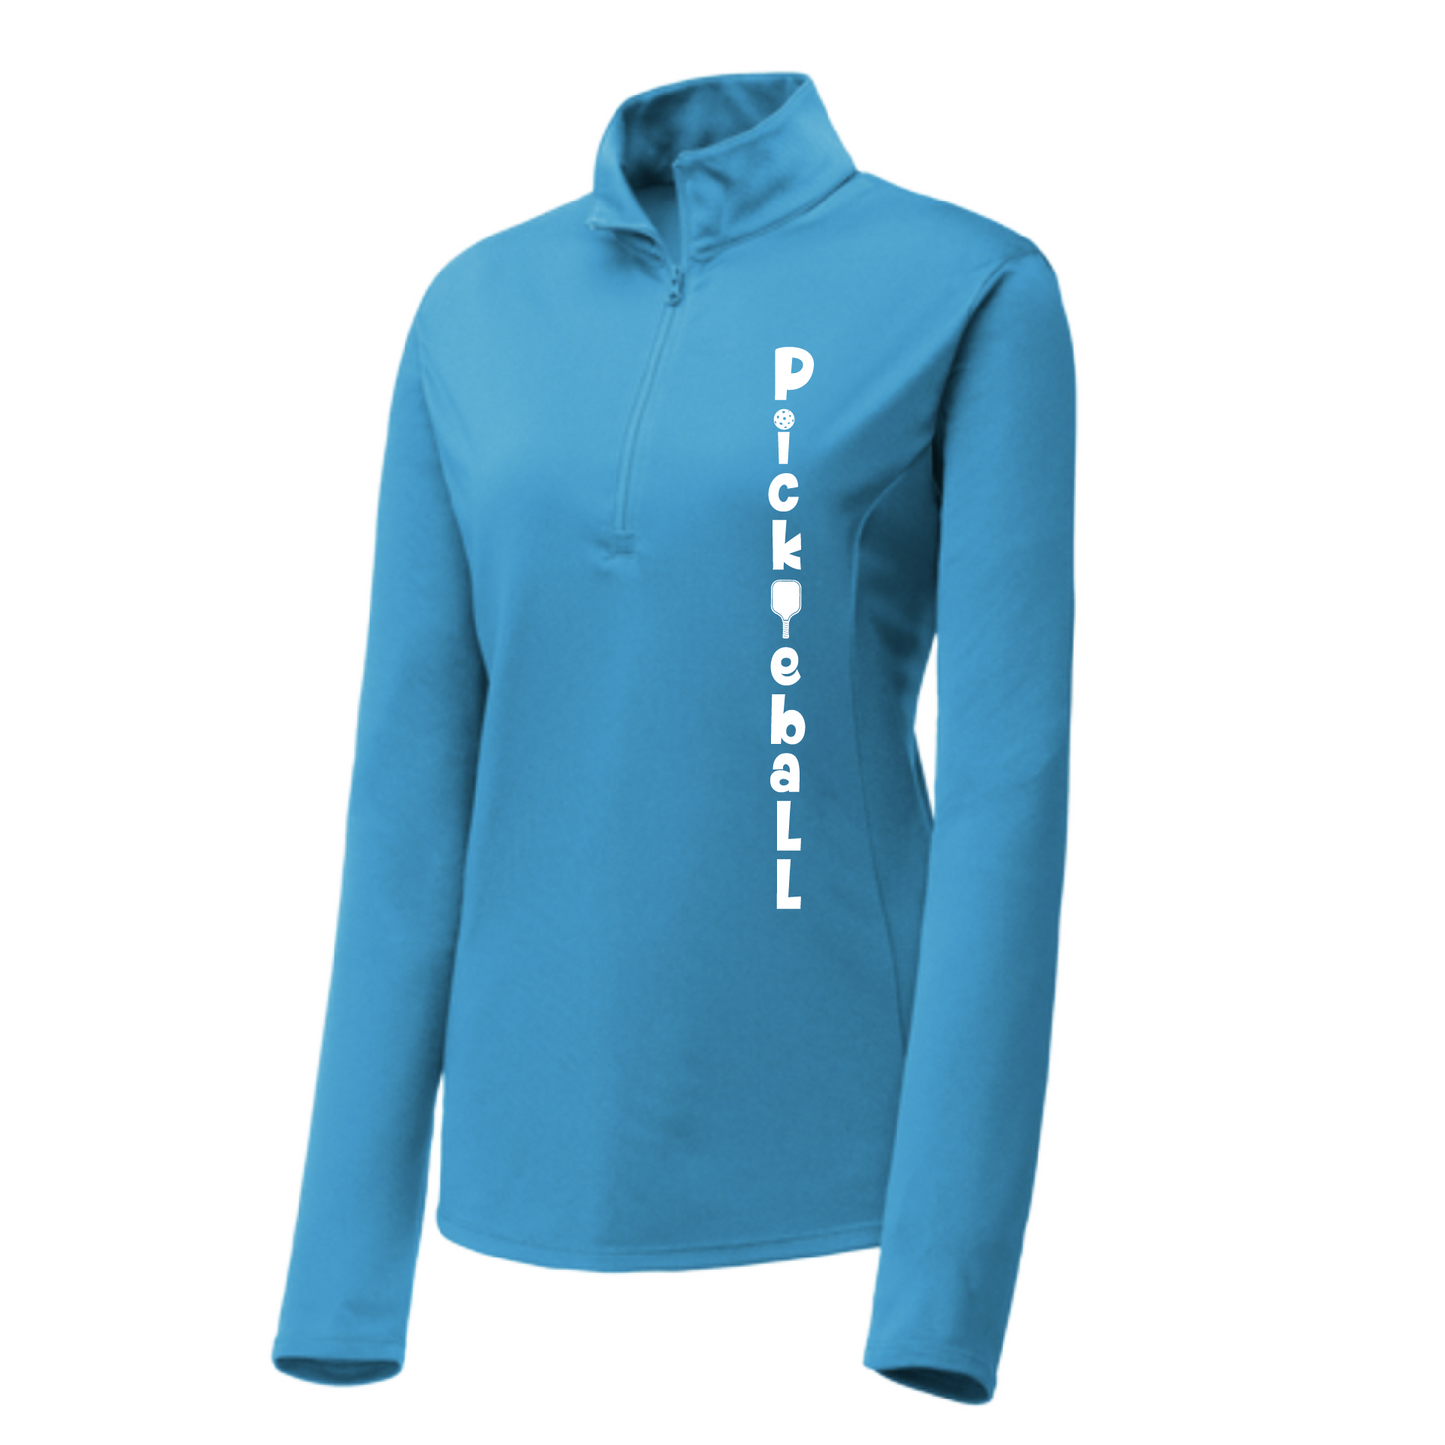 Design: Pickleball (Vertical) Customizable Location  Women's 1/4-Zip Pullover: Princess seams and drop tail hem.  Turn up the volume in this Women's shirt with its perfect mix of softness and attitude. Material is ultra-comfortable with moisture wicking properties and tri-blend softness. PosiCharge technology locks in color. Highly breathable and lightweight. Versatile enough for wearing year-round.